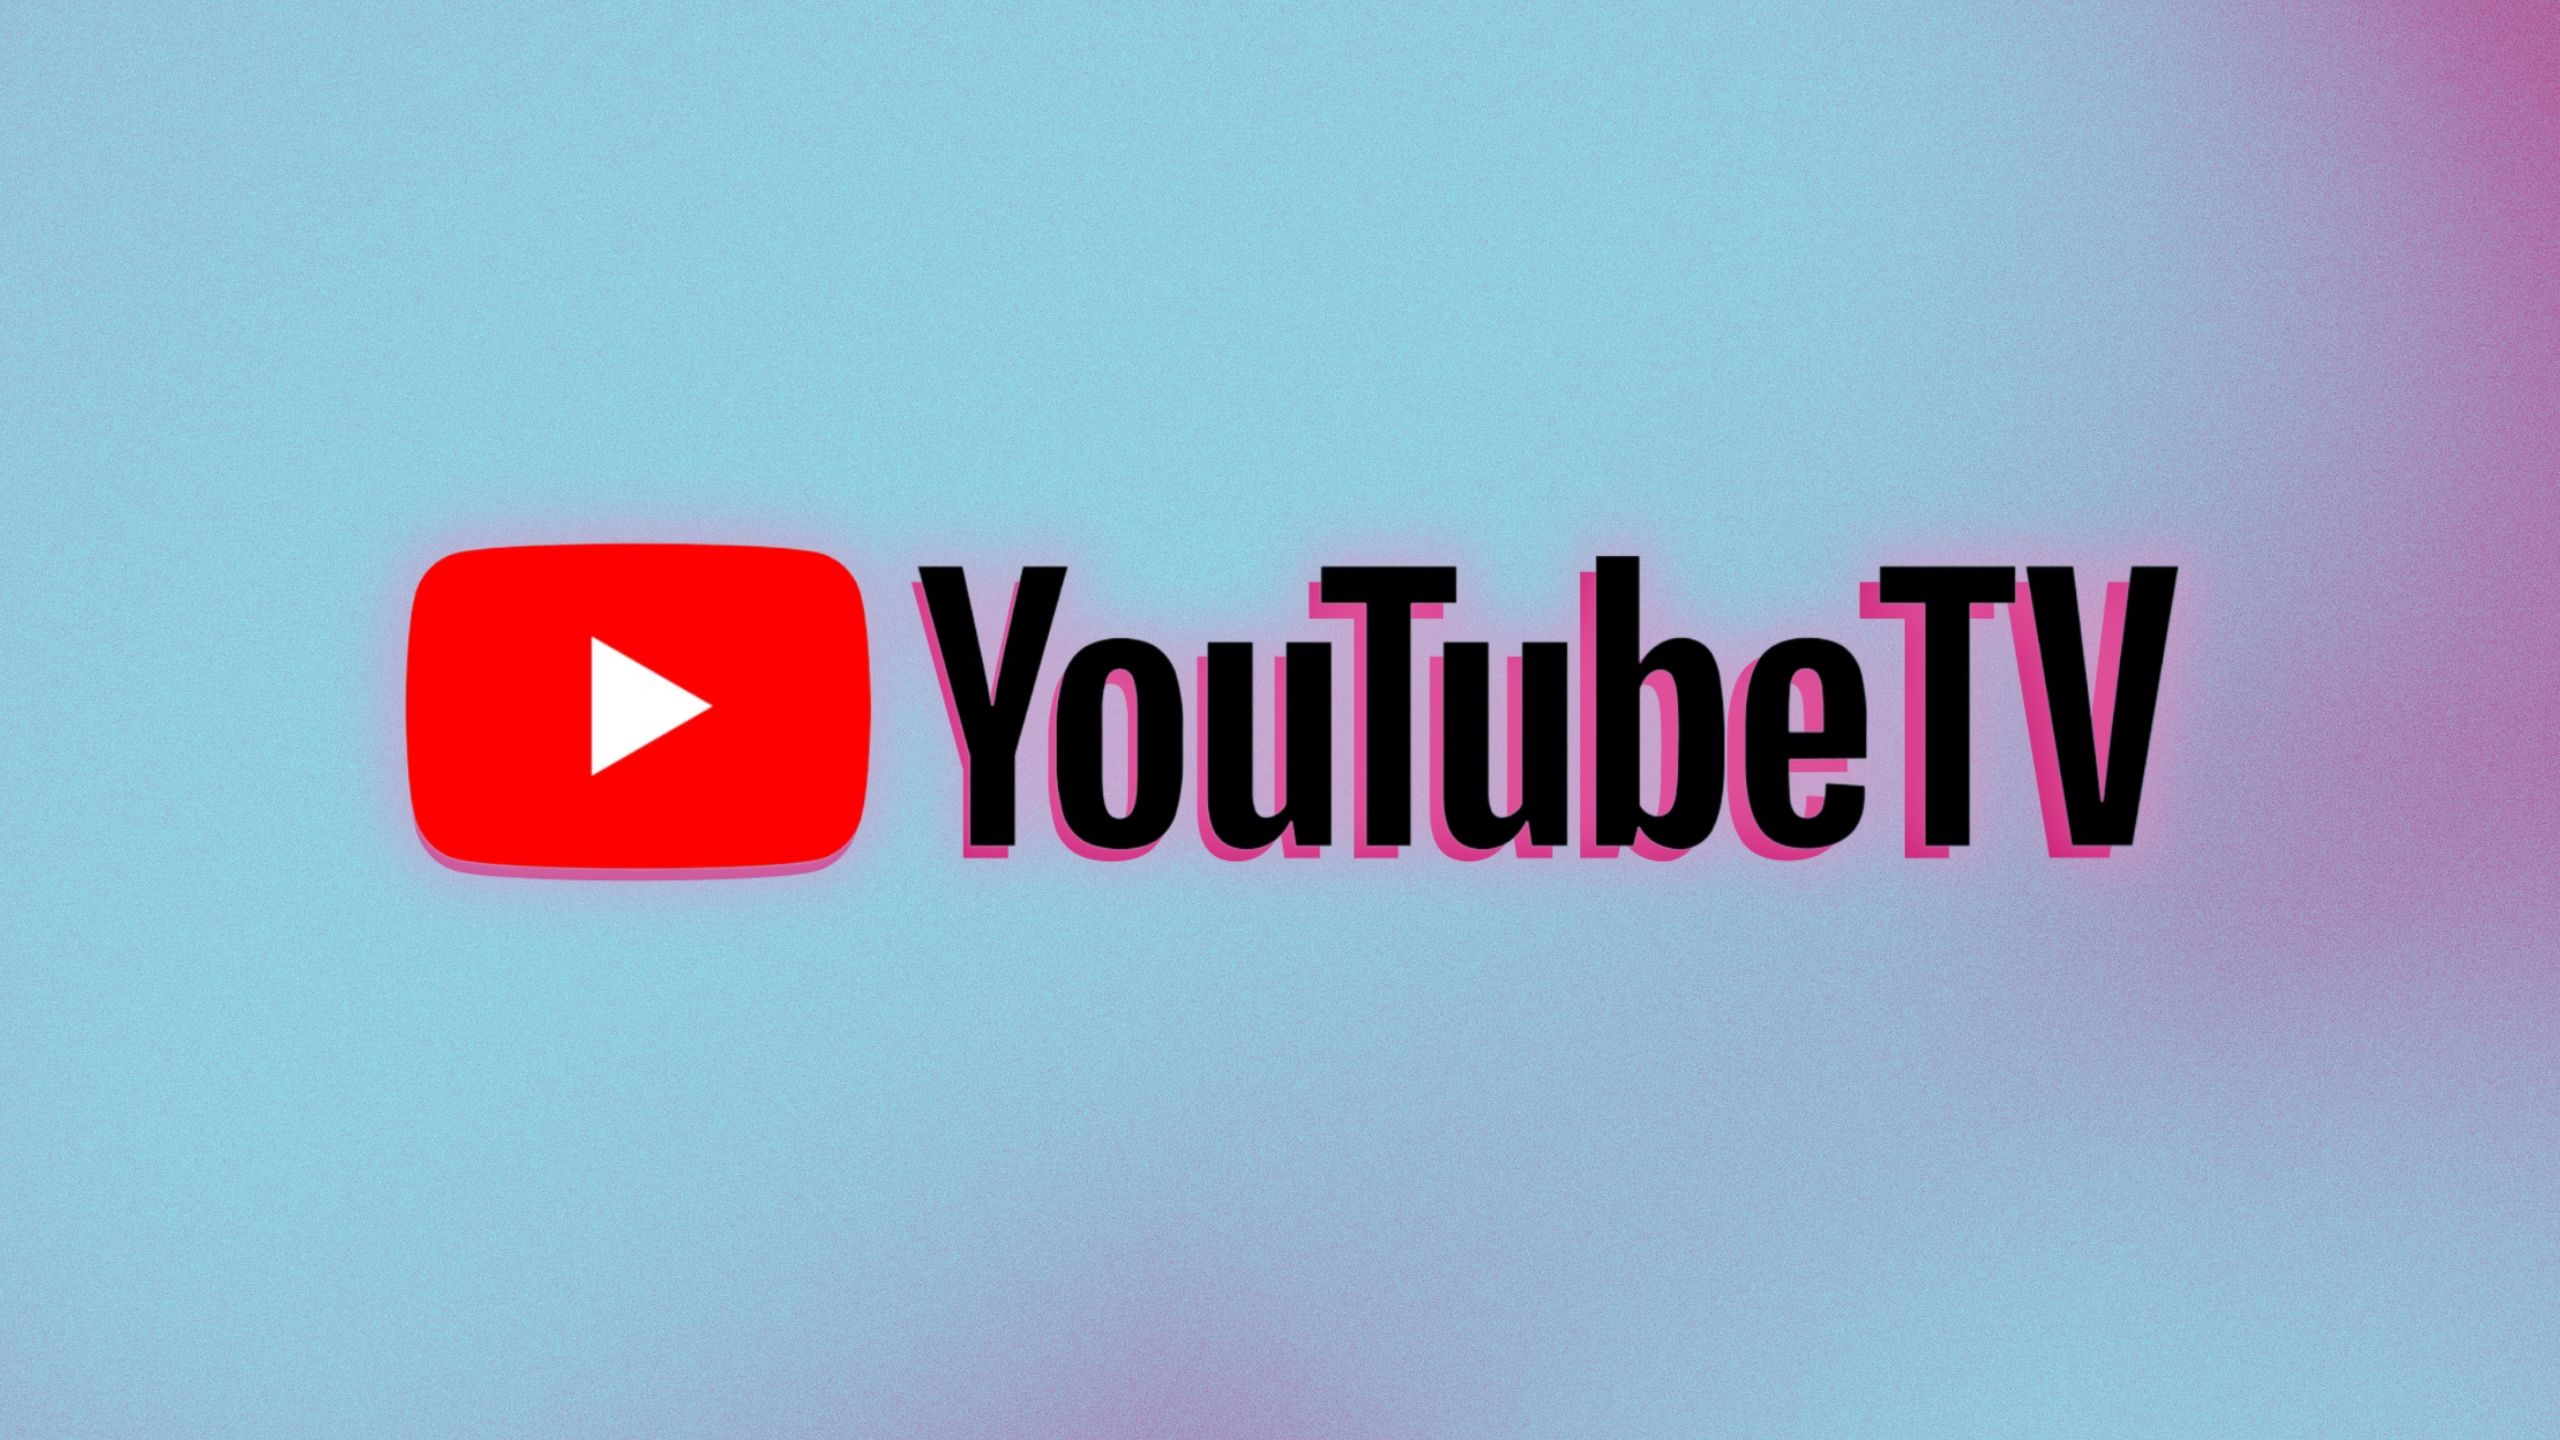 YouTube TV logo against a blue and purple background. 